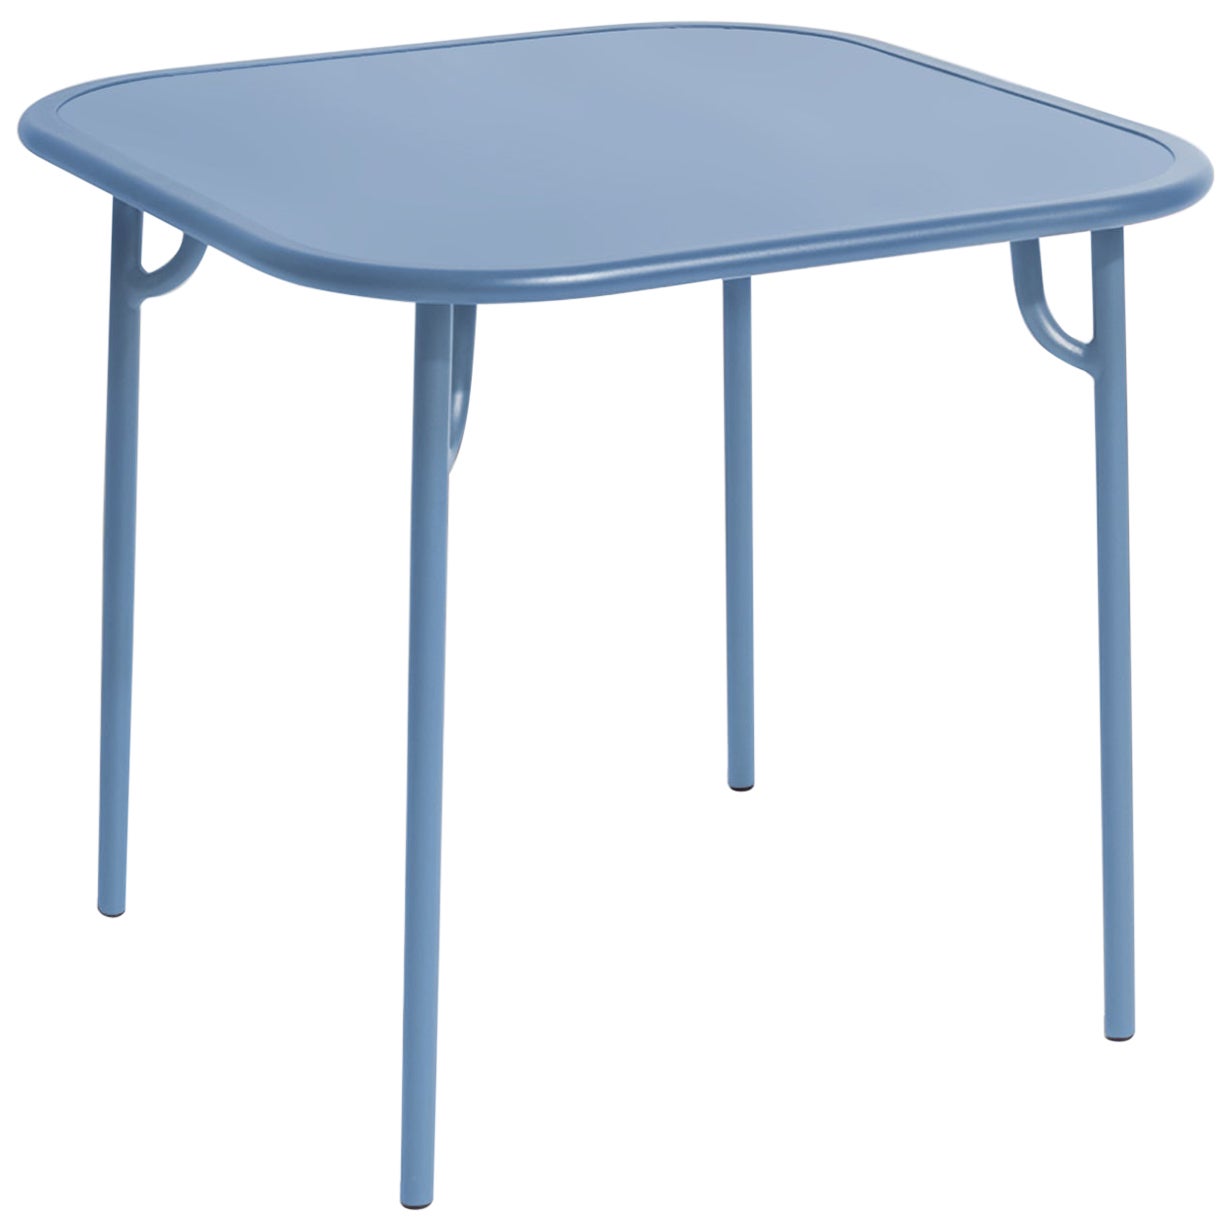 Petite Friture Week-End Plain Square Dining Table in Azure Blue Aluminium, 2017 For Sale